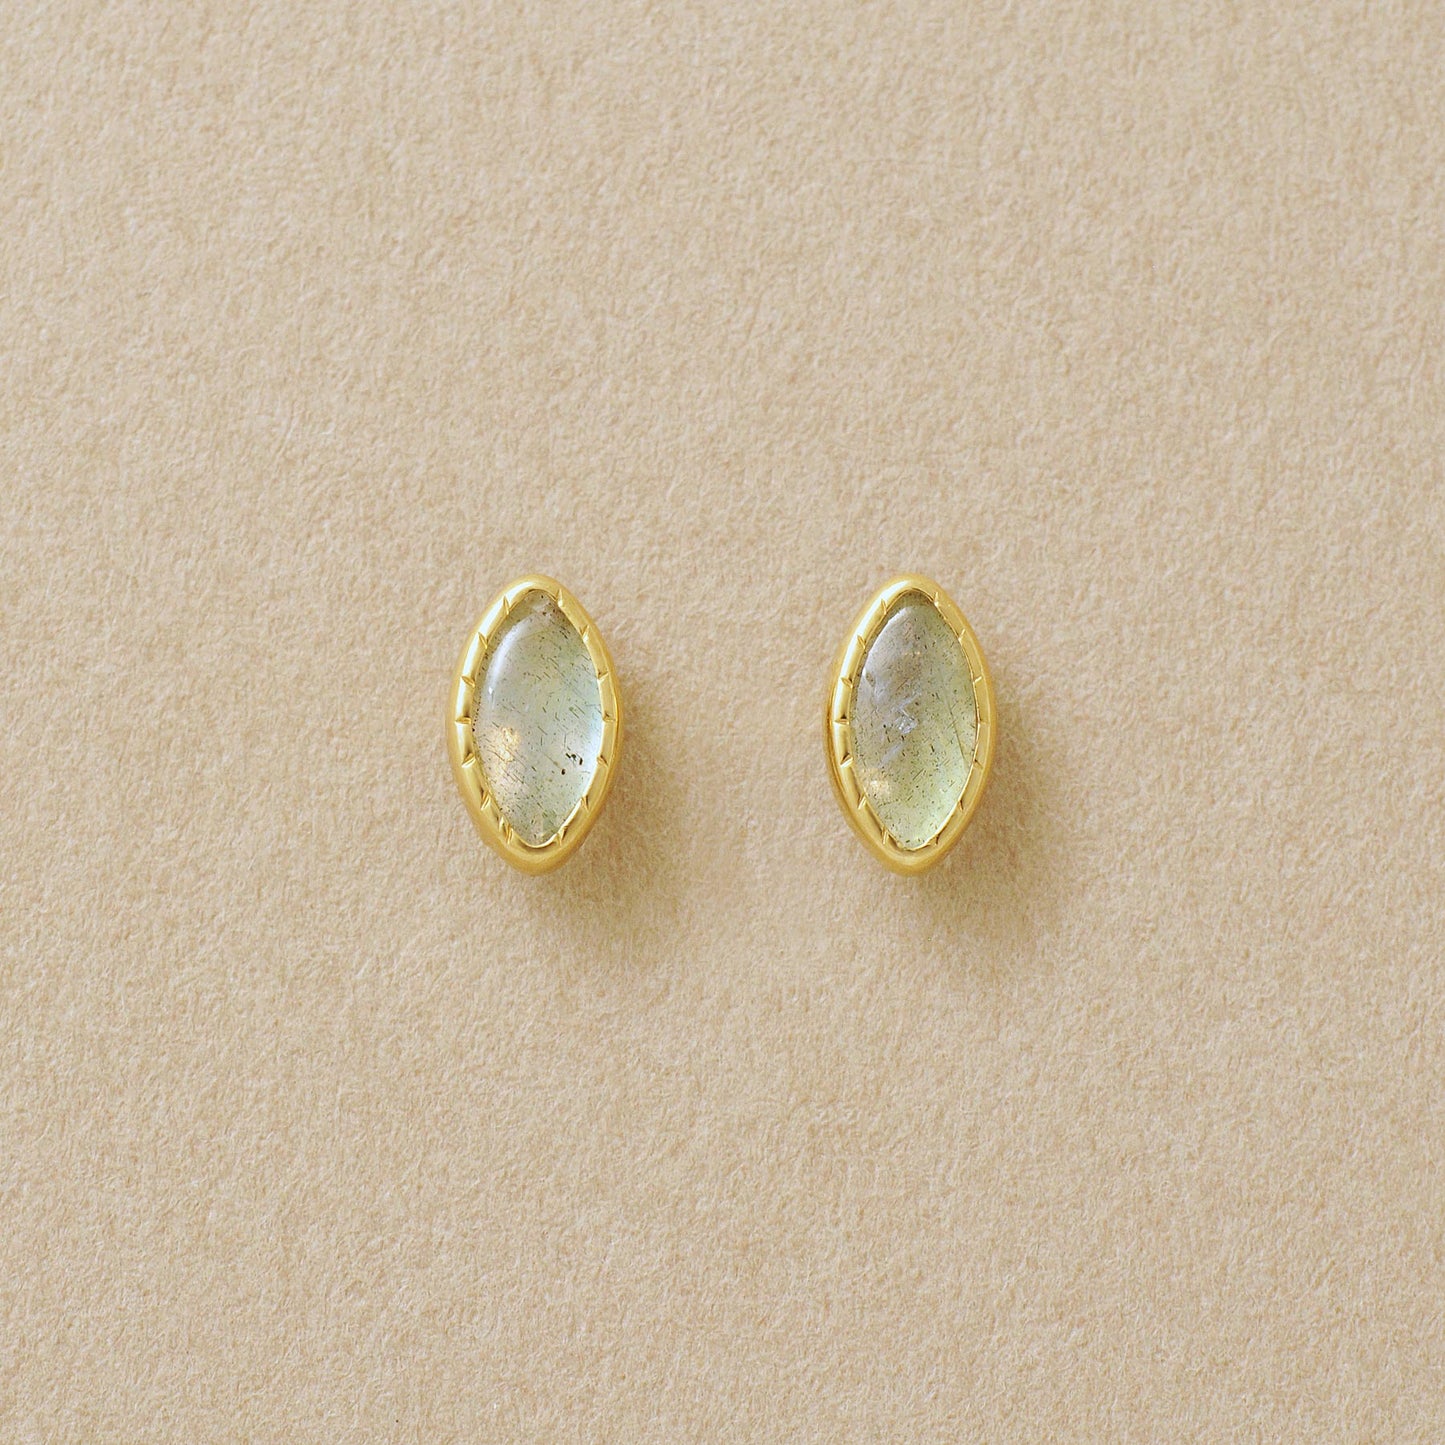 [Second Earrings] 18K Labradorite Earrings (Yellow Gold) - Product Image